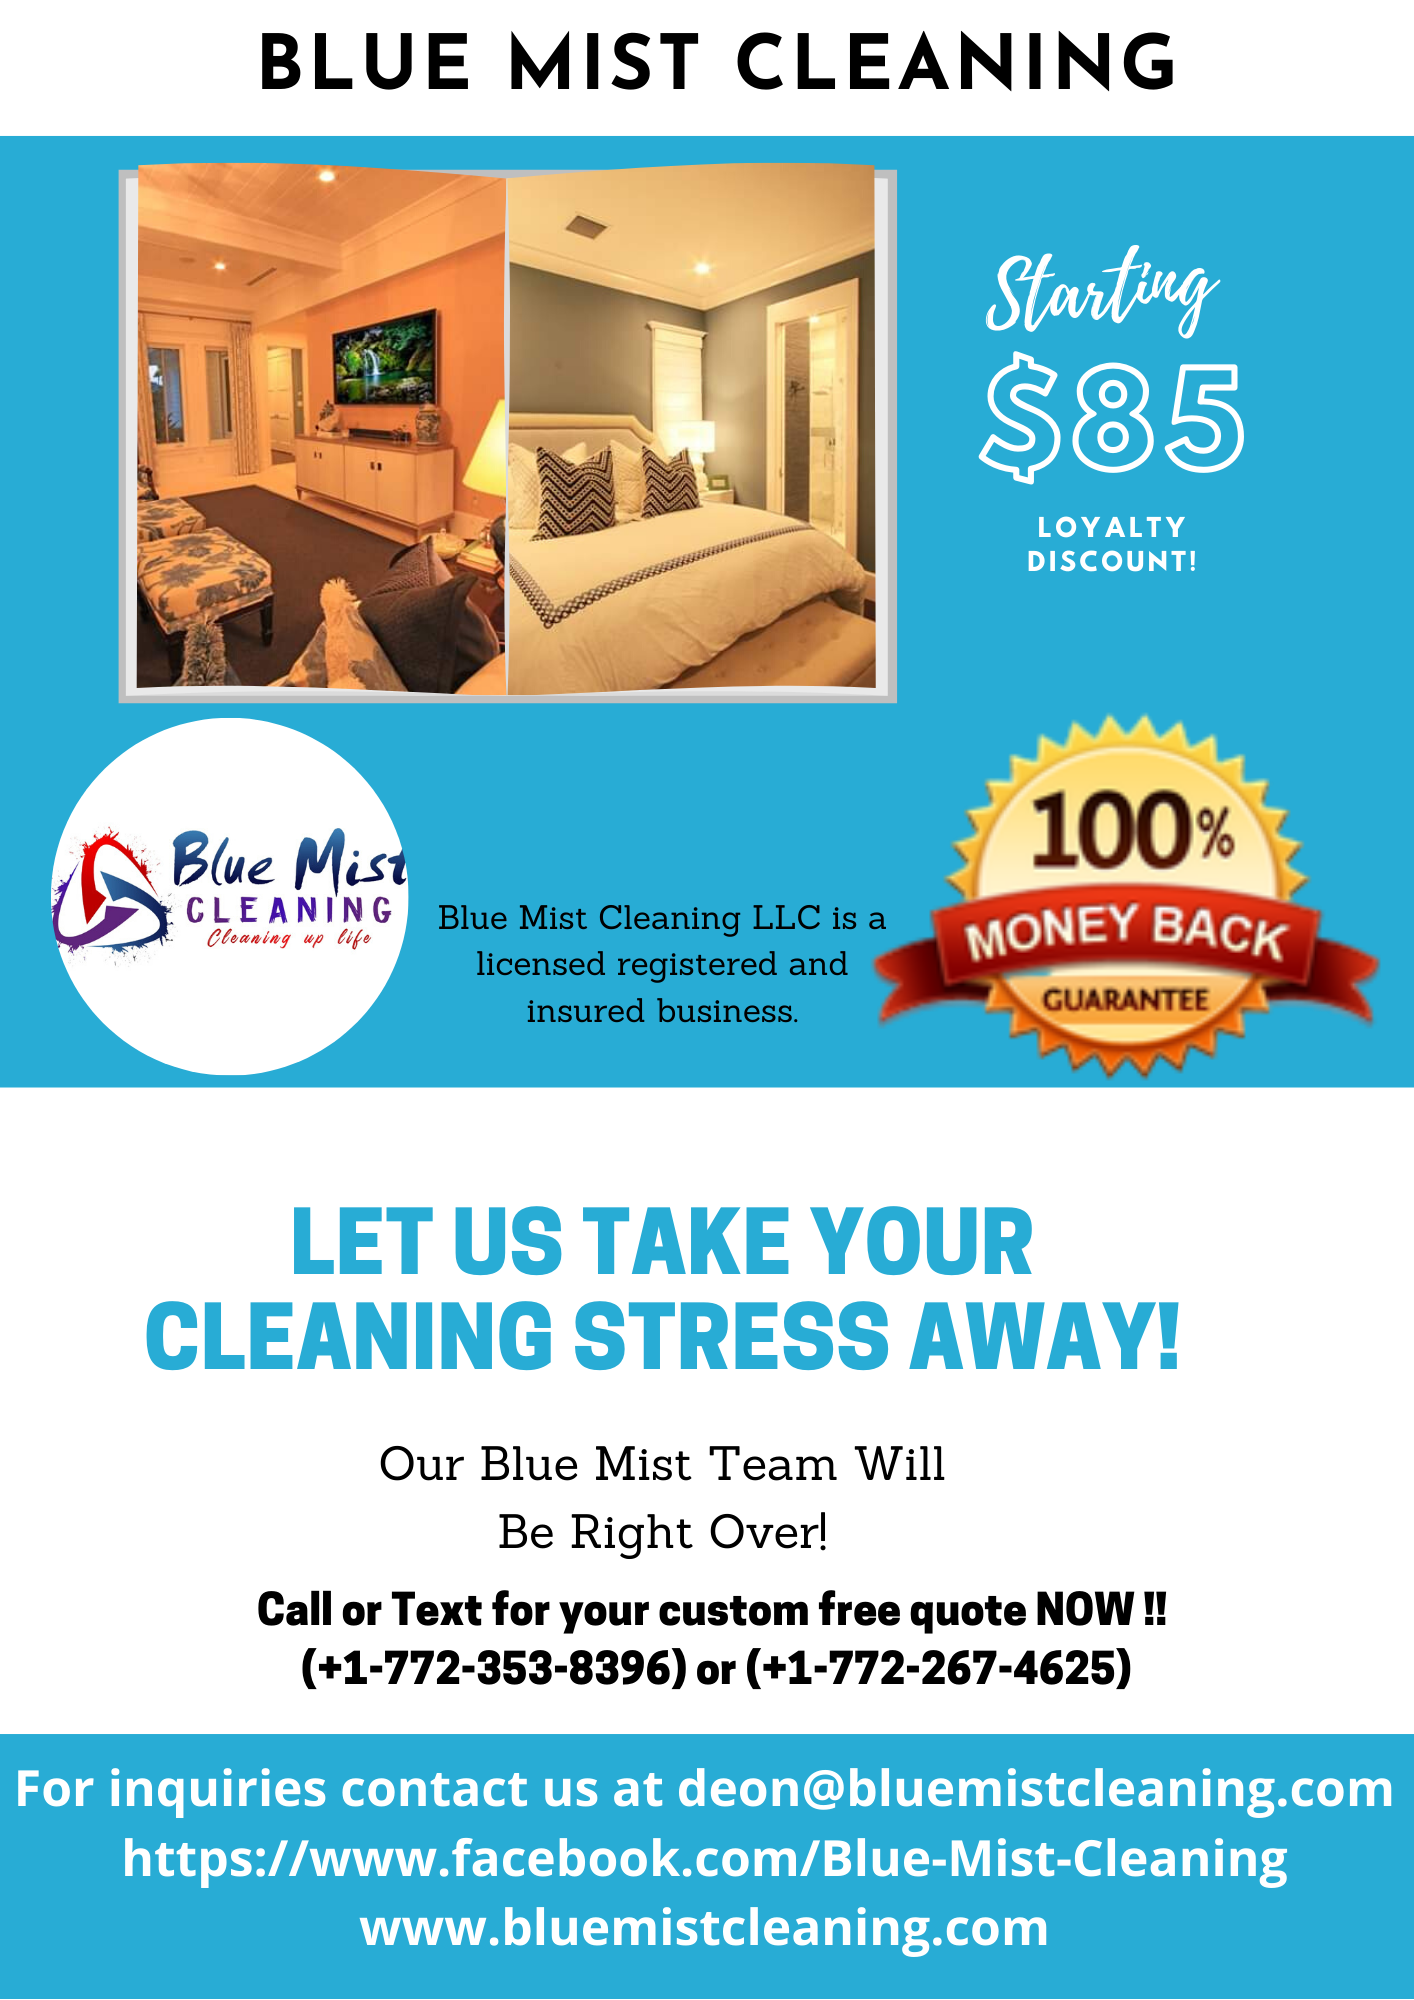 Basic Home Cleaning Services at Orlando